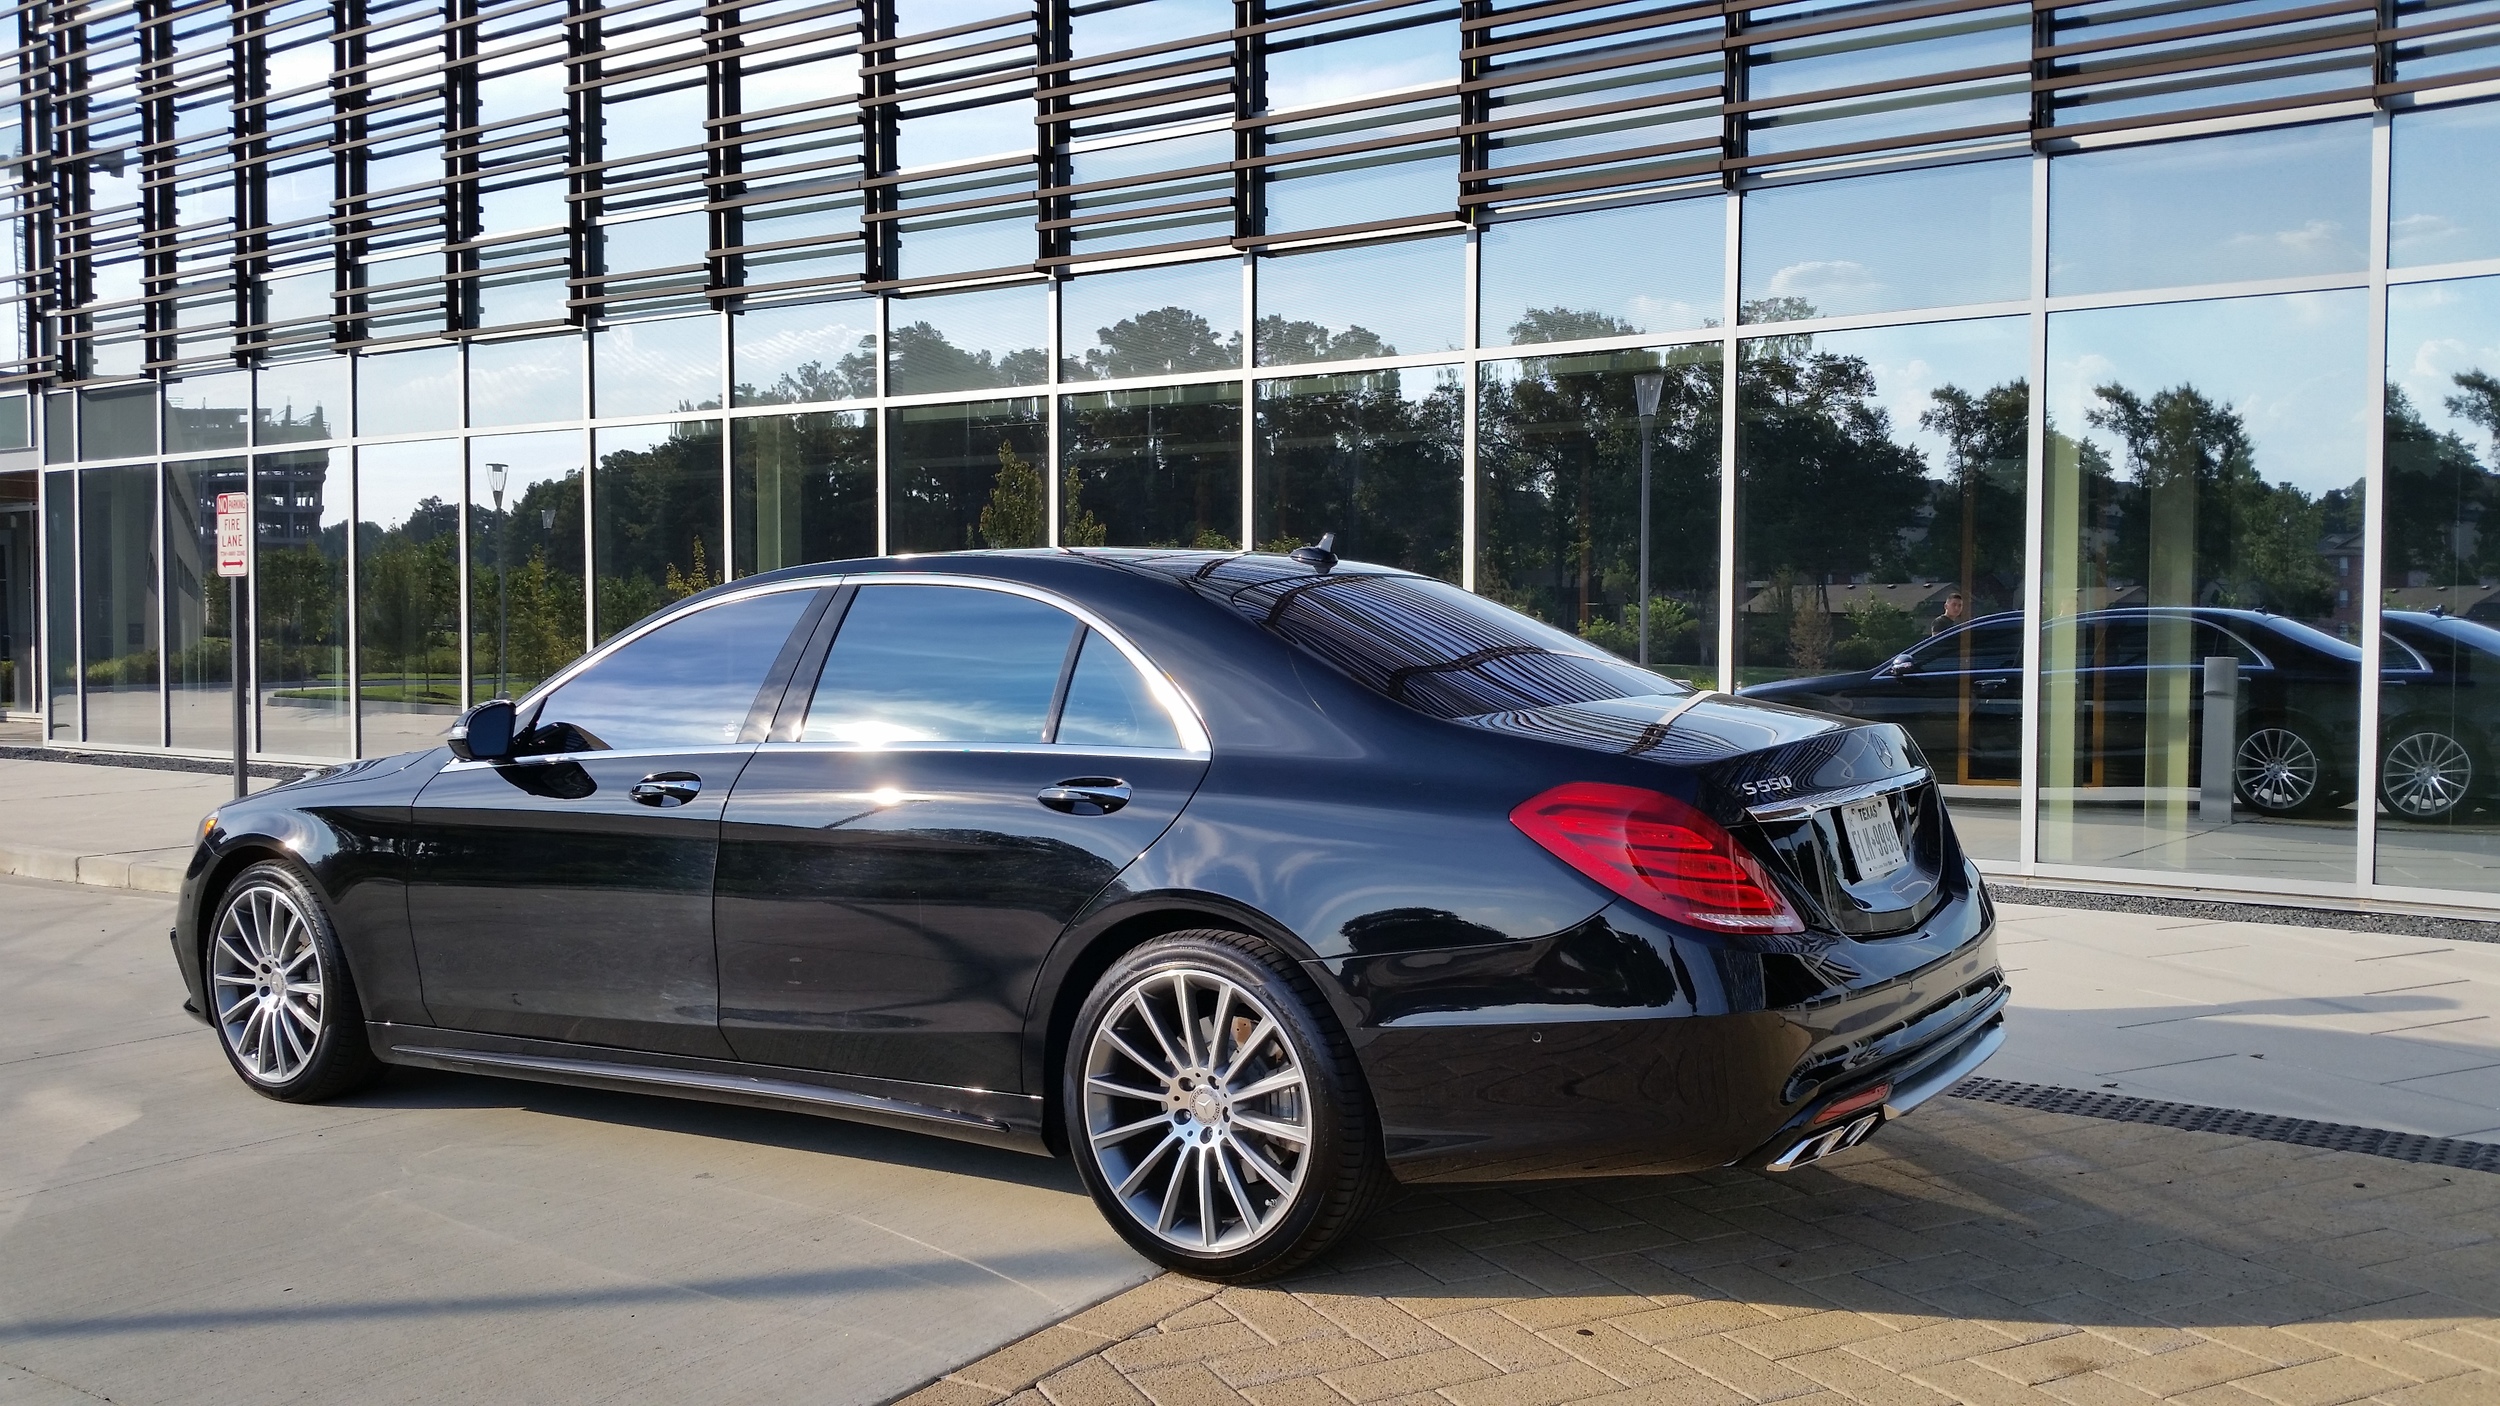 Rent a Mercedes Benz S550 (AMG) in Houston — Exotic Car Rental ...